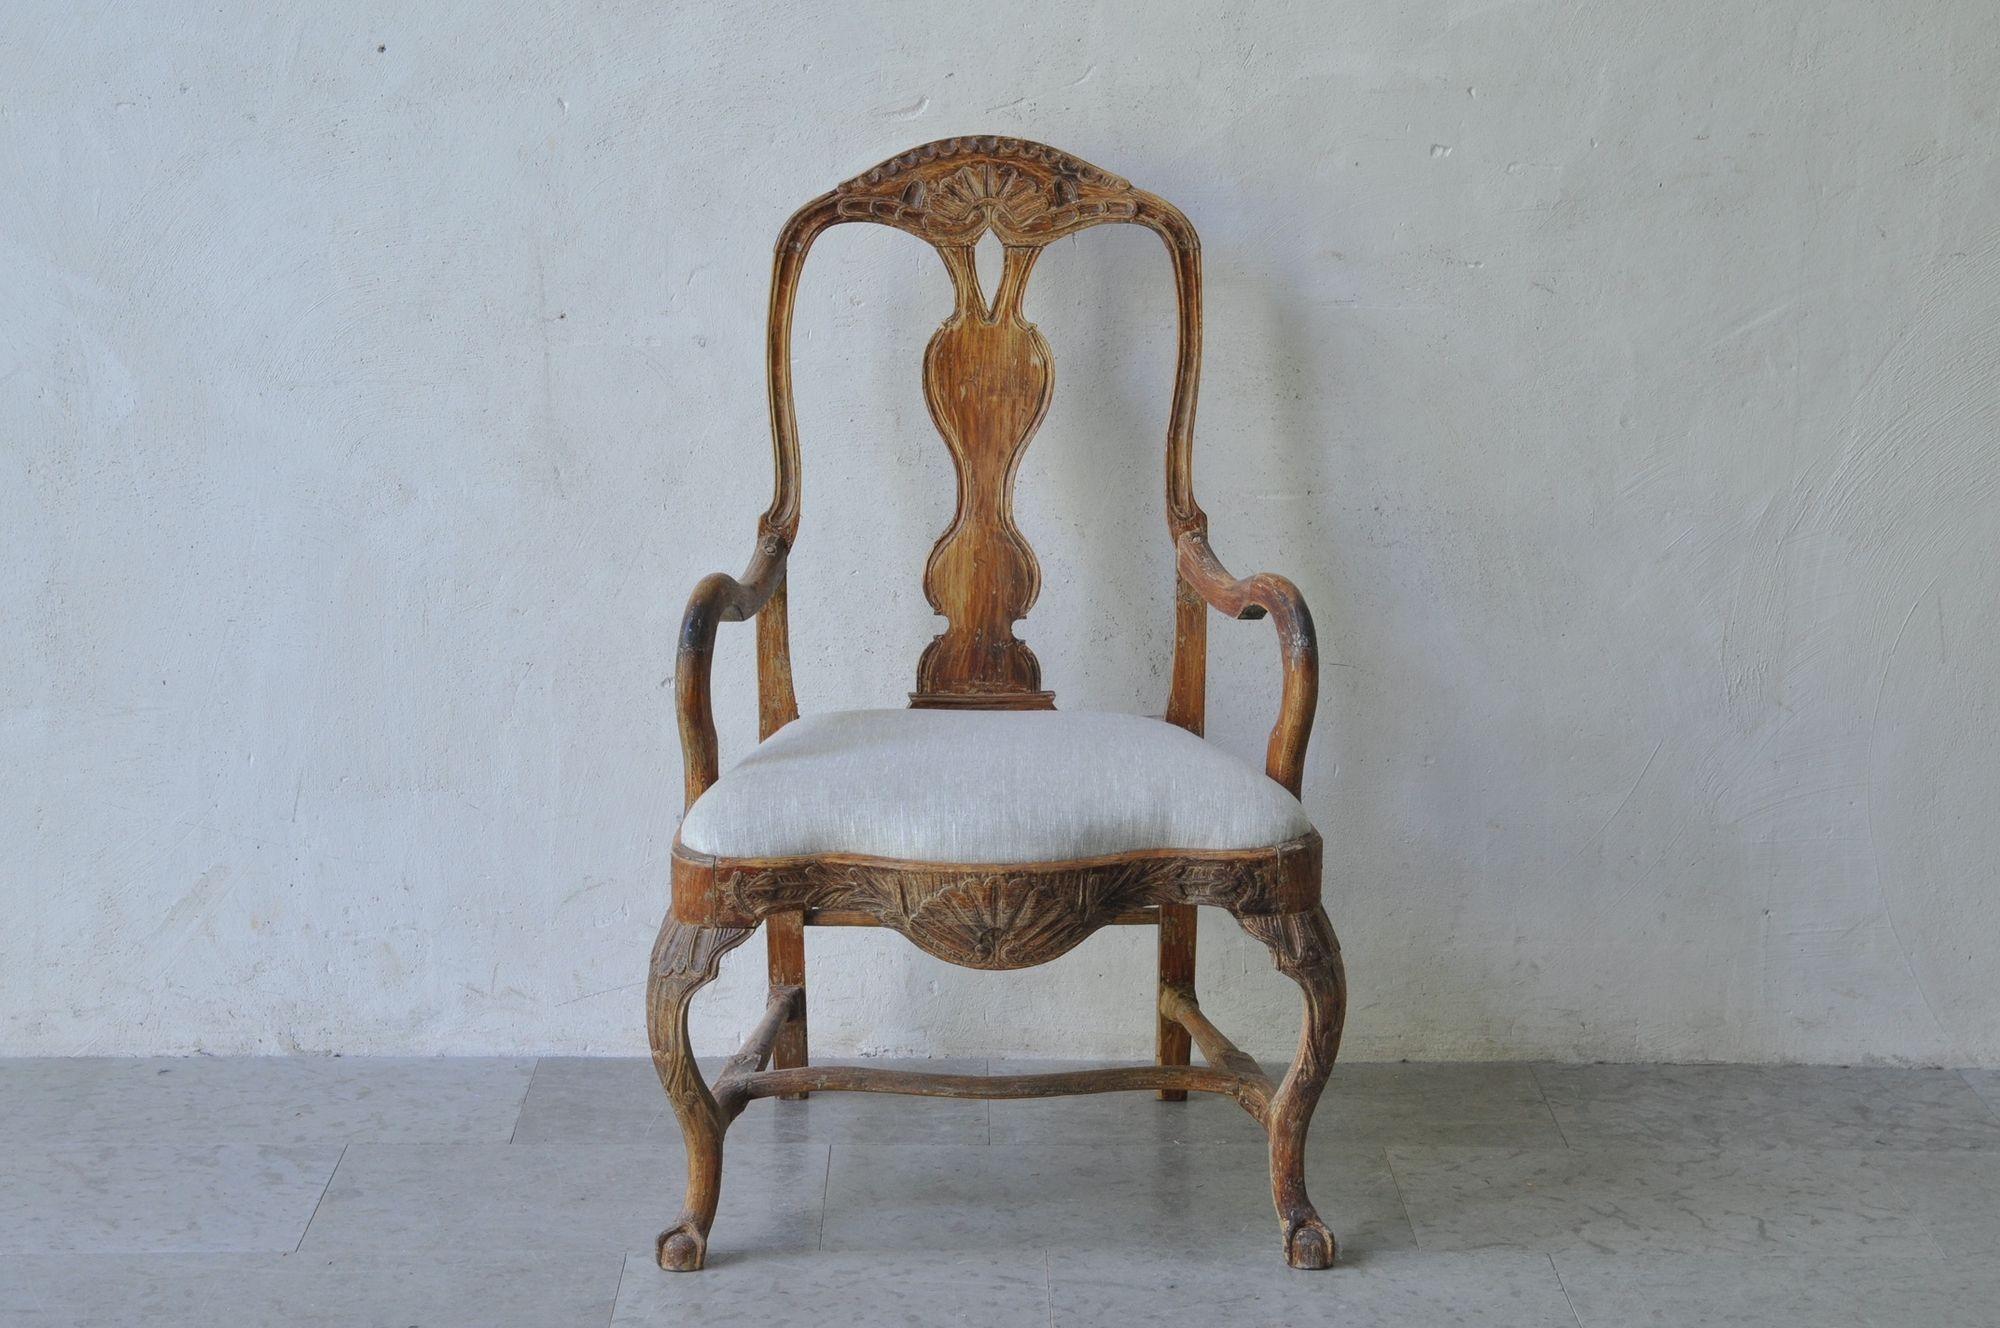 An 18th c Rococo period armchair from Lindome, Sweden, hand-scraped to the original paint and newly upholstered in linen. Lovely shell motif on the back and seat frame with cabriole legs terminating in claw-and-ball foot with shaped, H-stretcher